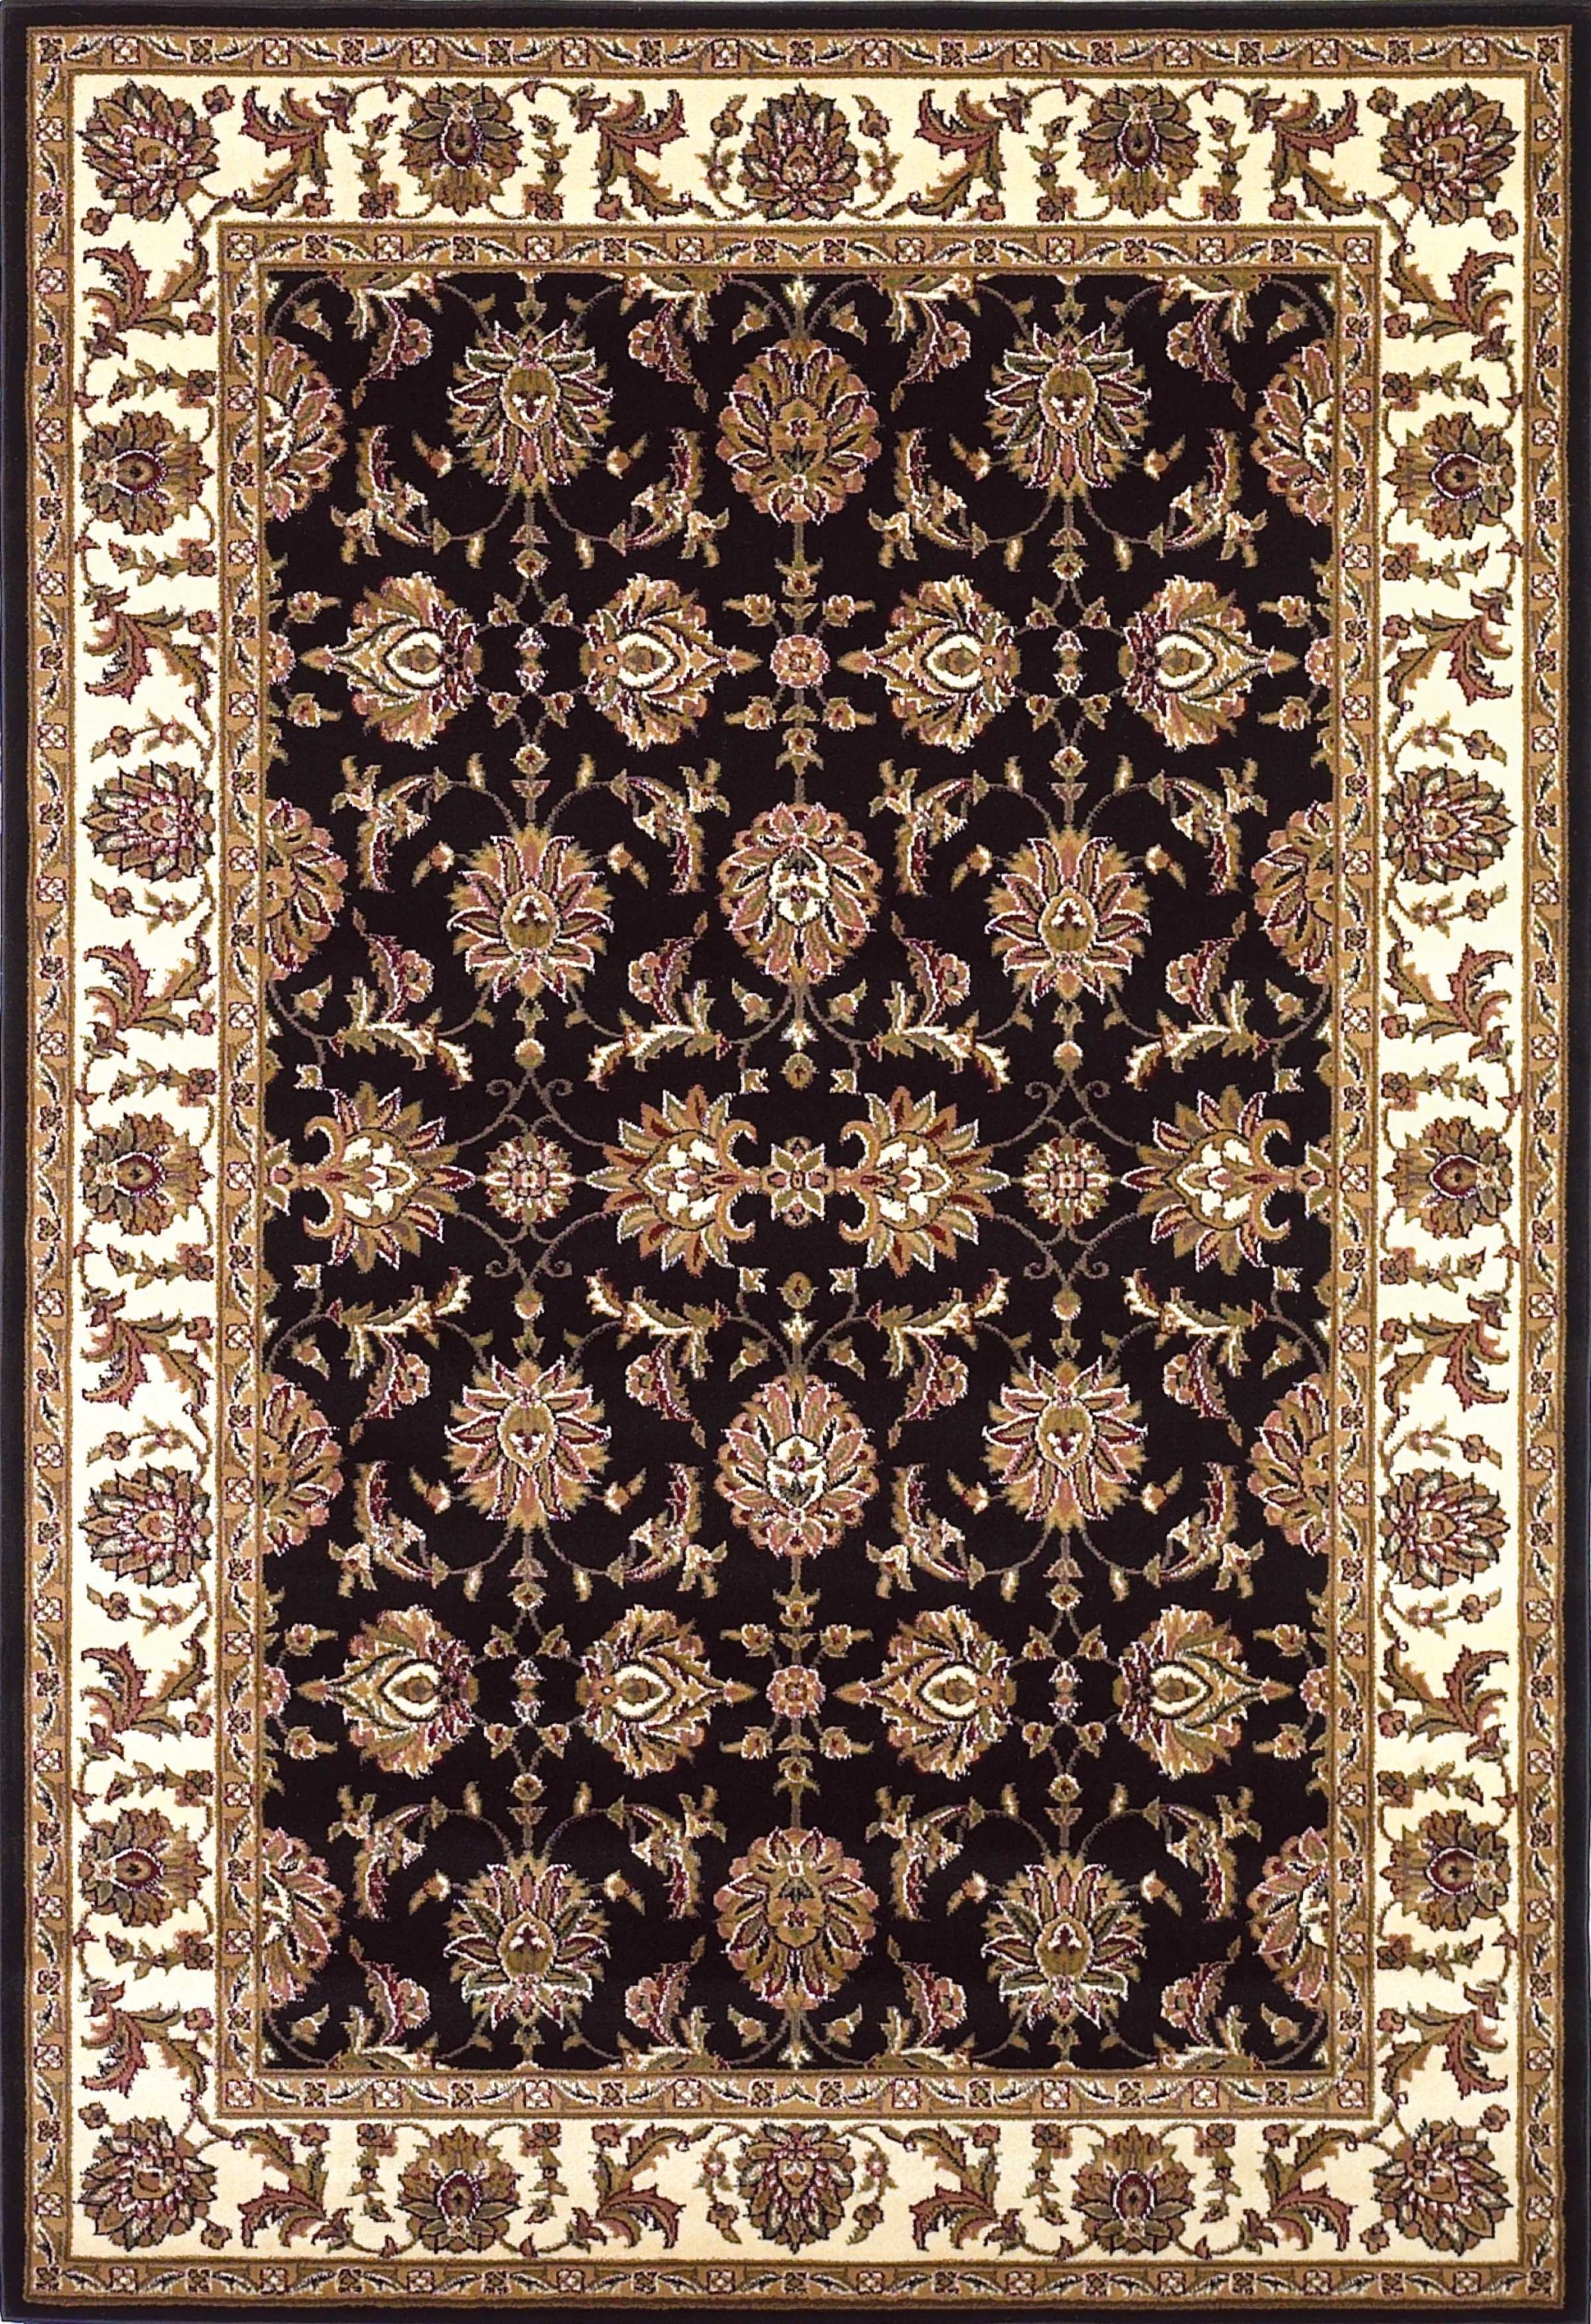 8'X11' Black Ivory Machine Woven Floral Traditional Indoor Area Rug-354175-1